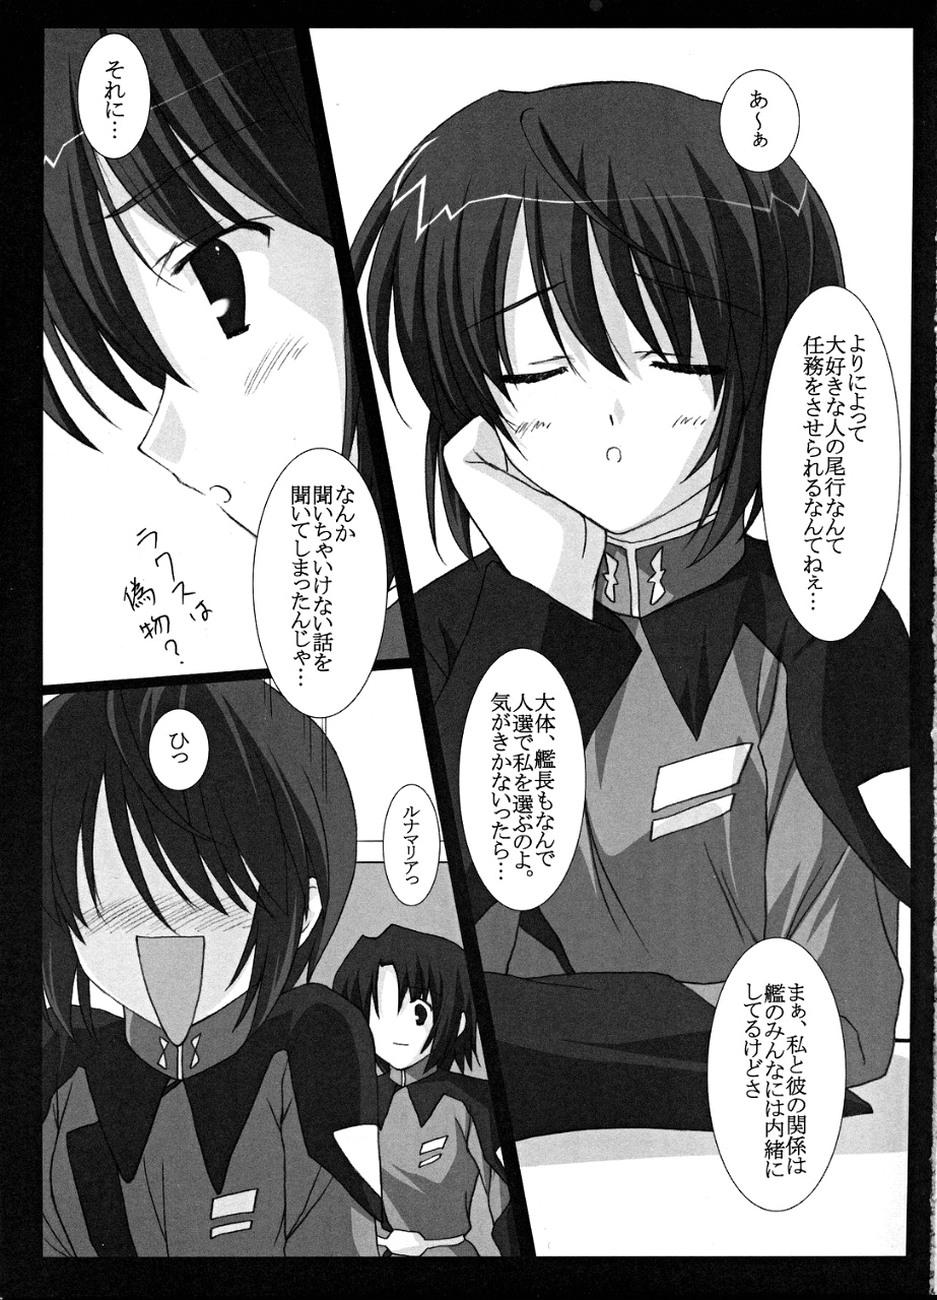 Russia Red Impact IV - Gundam seed destiny Asian Babes - Page 4